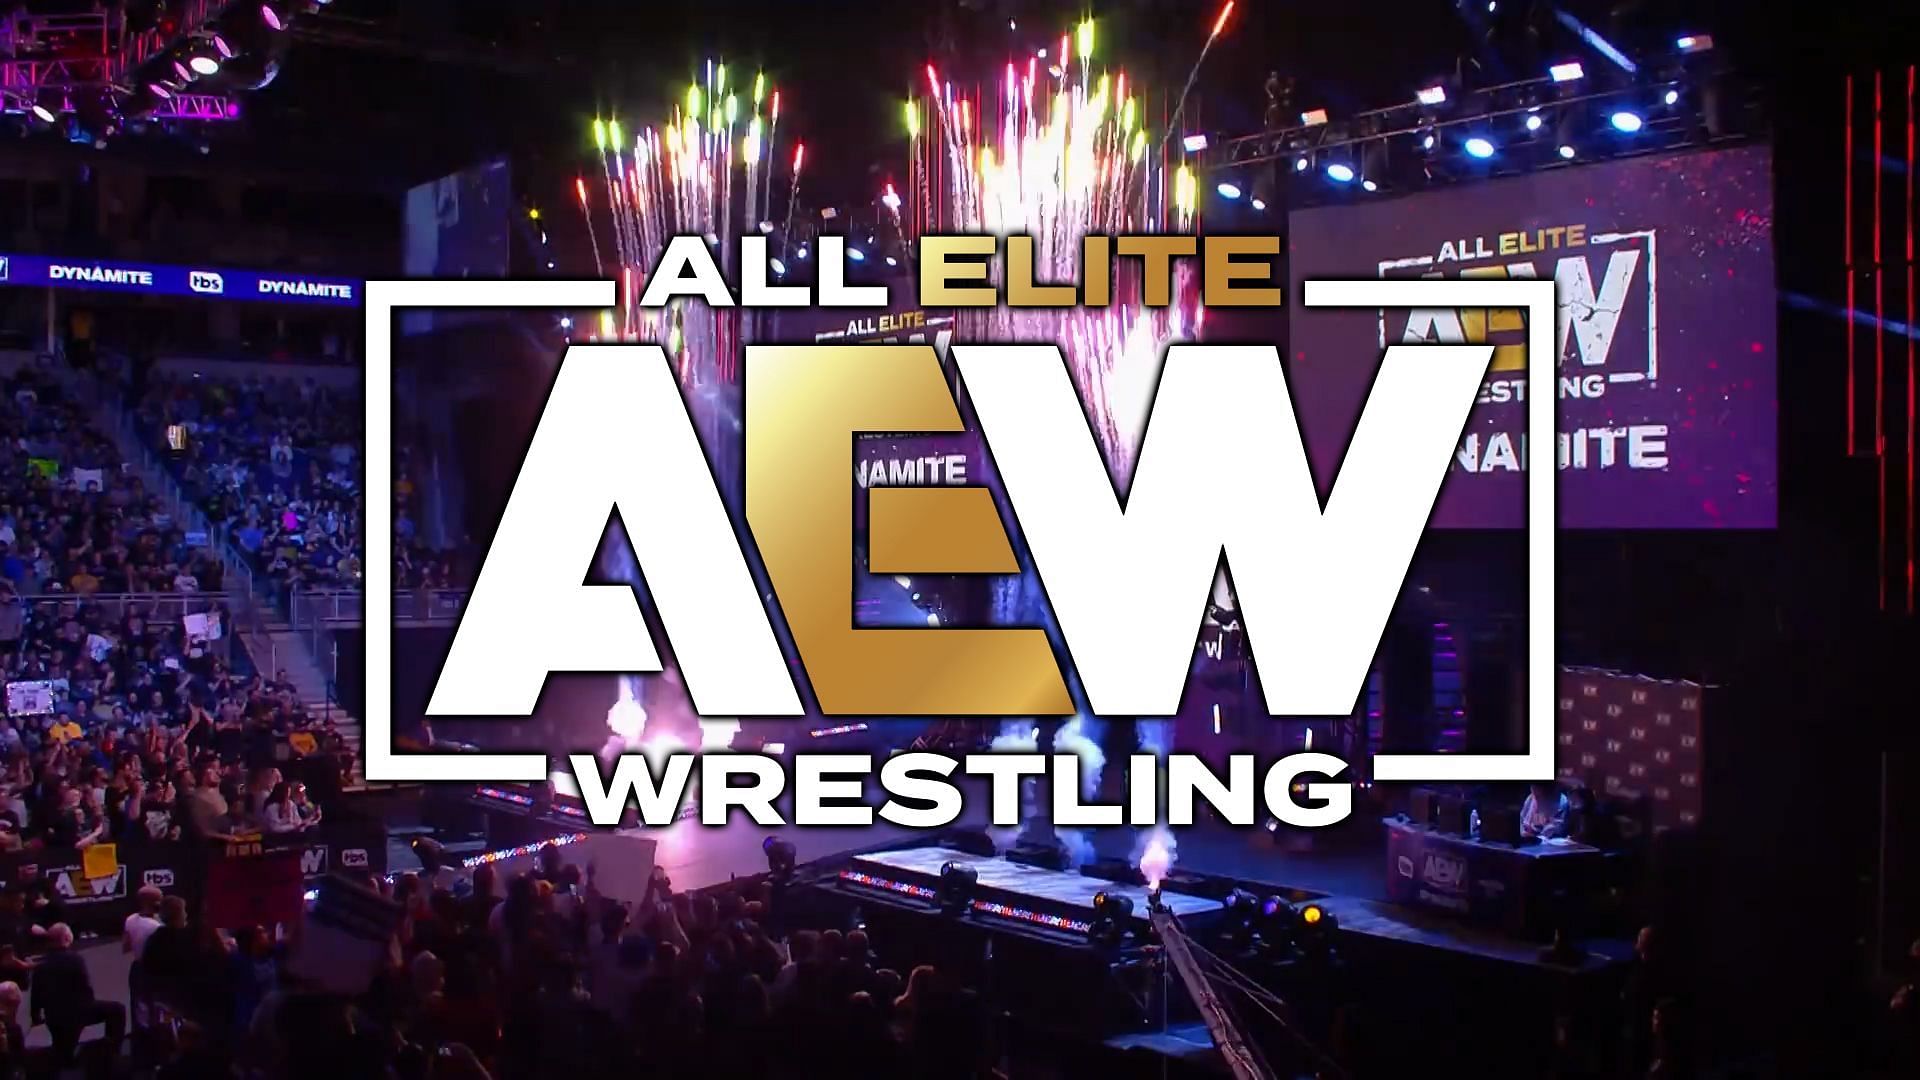 AEW often brings in outside talent for special appearances (image credit: All Elite Wrestling on YouTube)